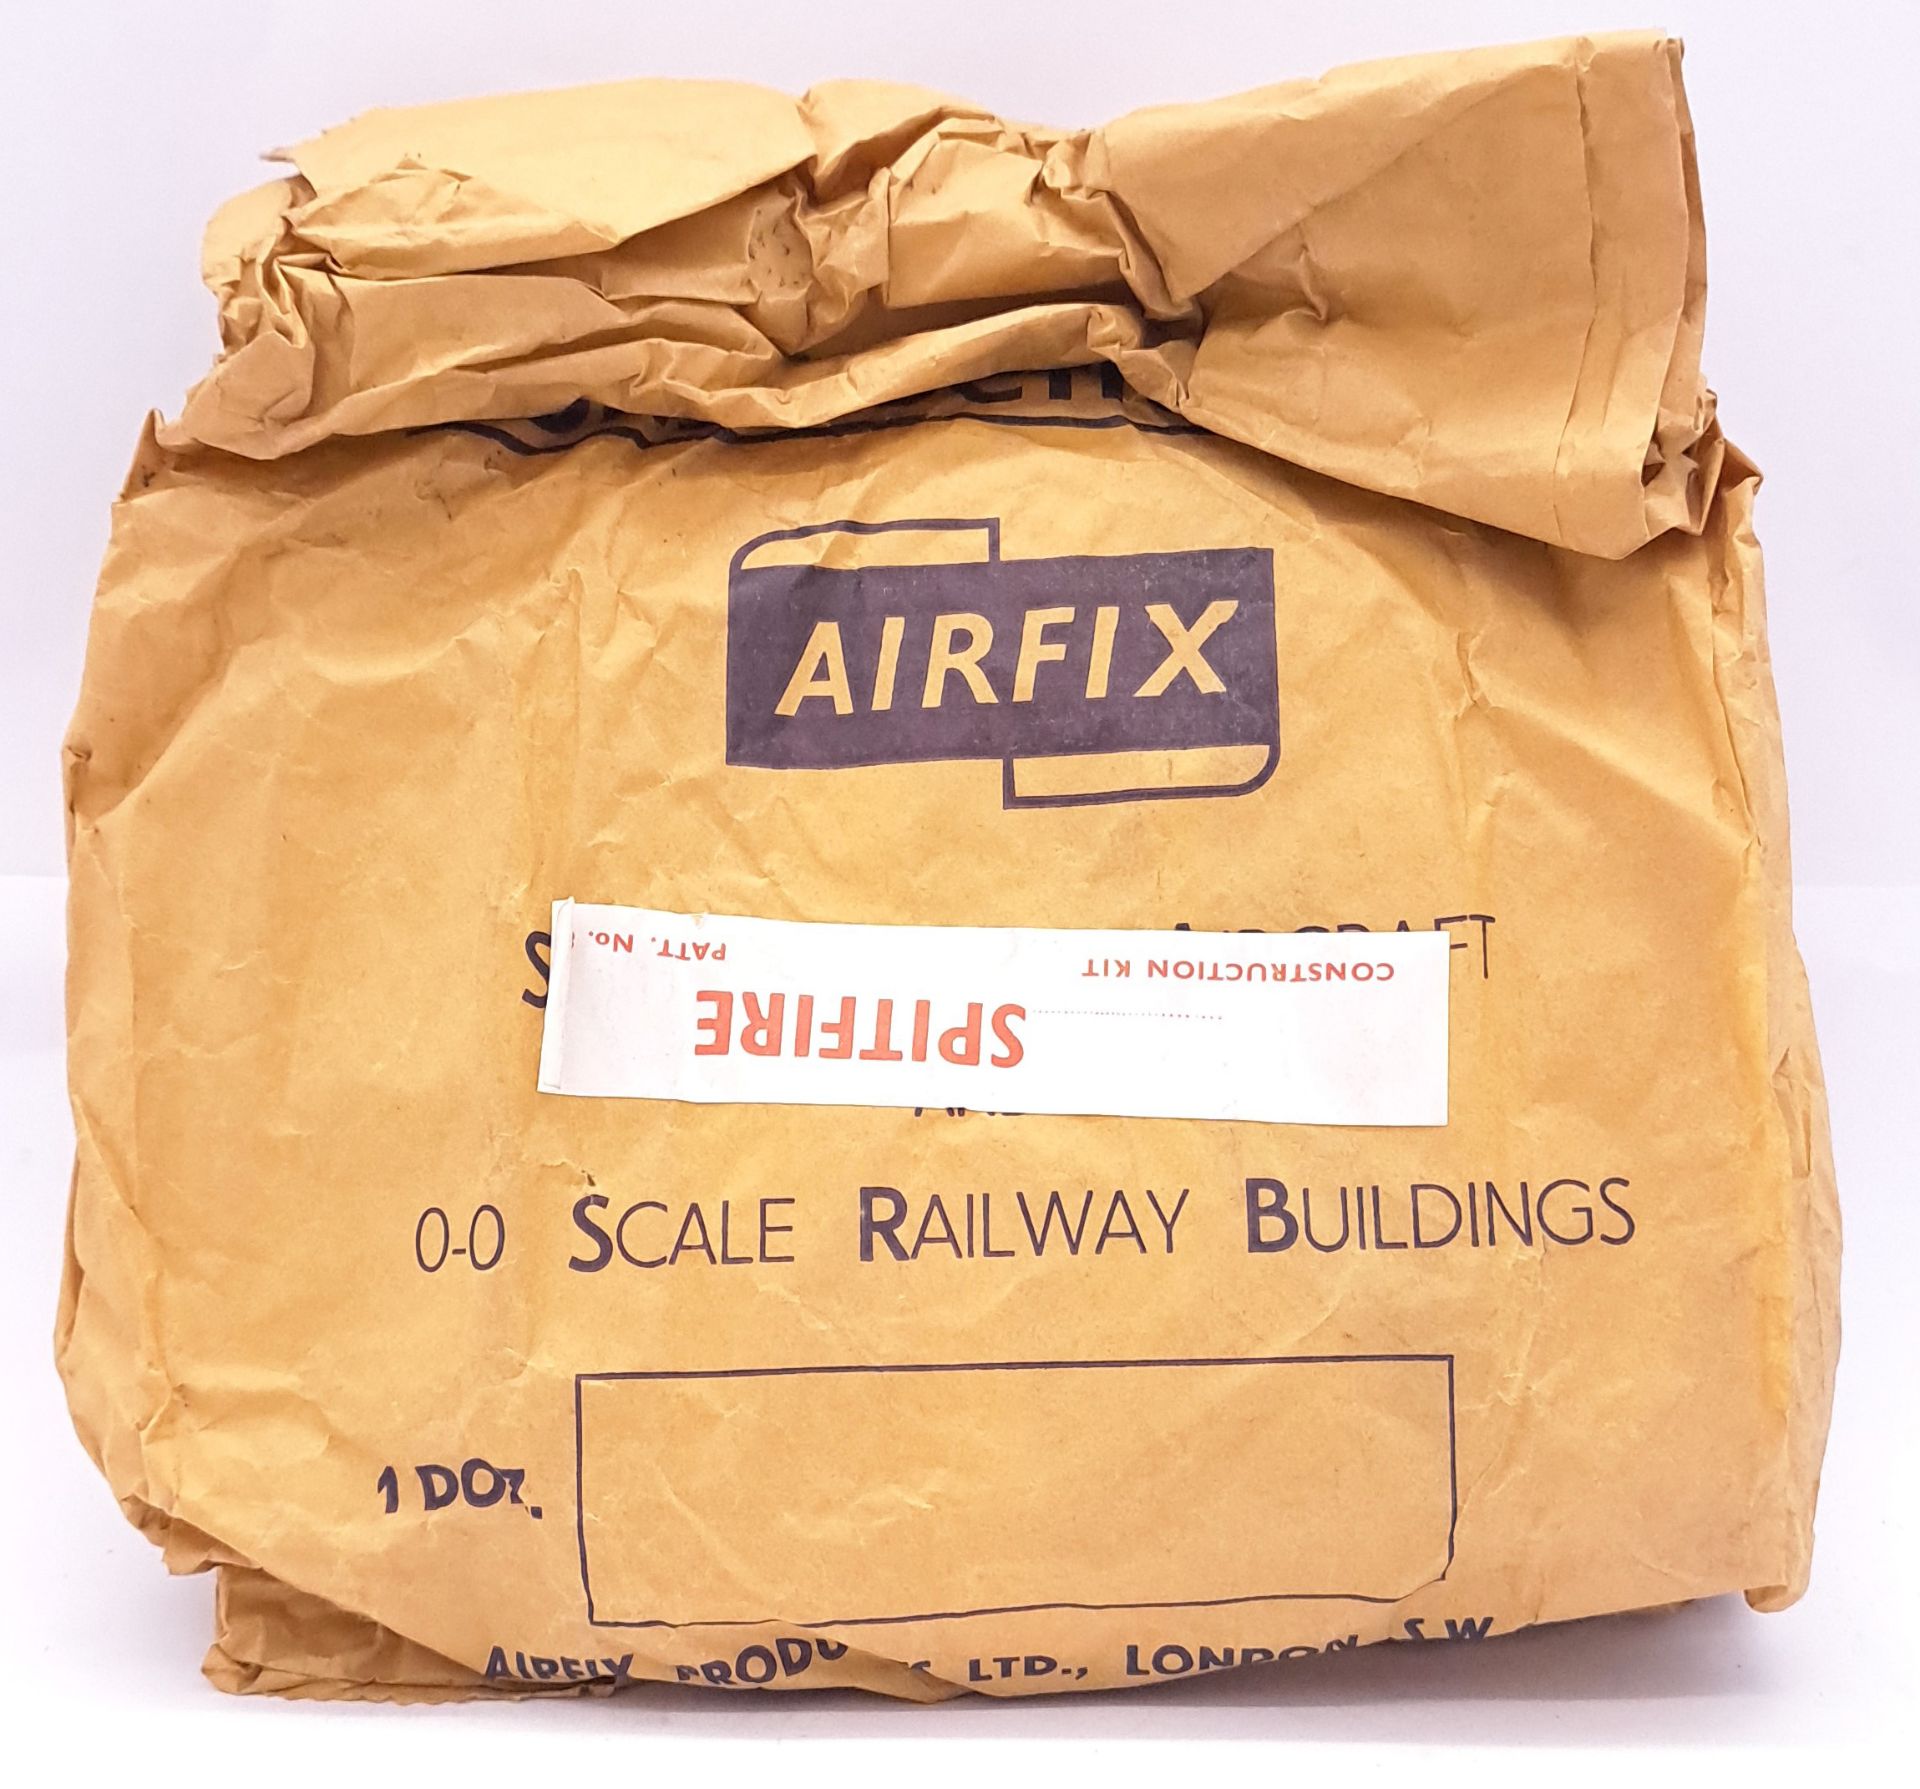 Airfix c1960’s ORIGINAL TRADE BAG complete with Bagged (possibly Type3) “Spitfire” Kits